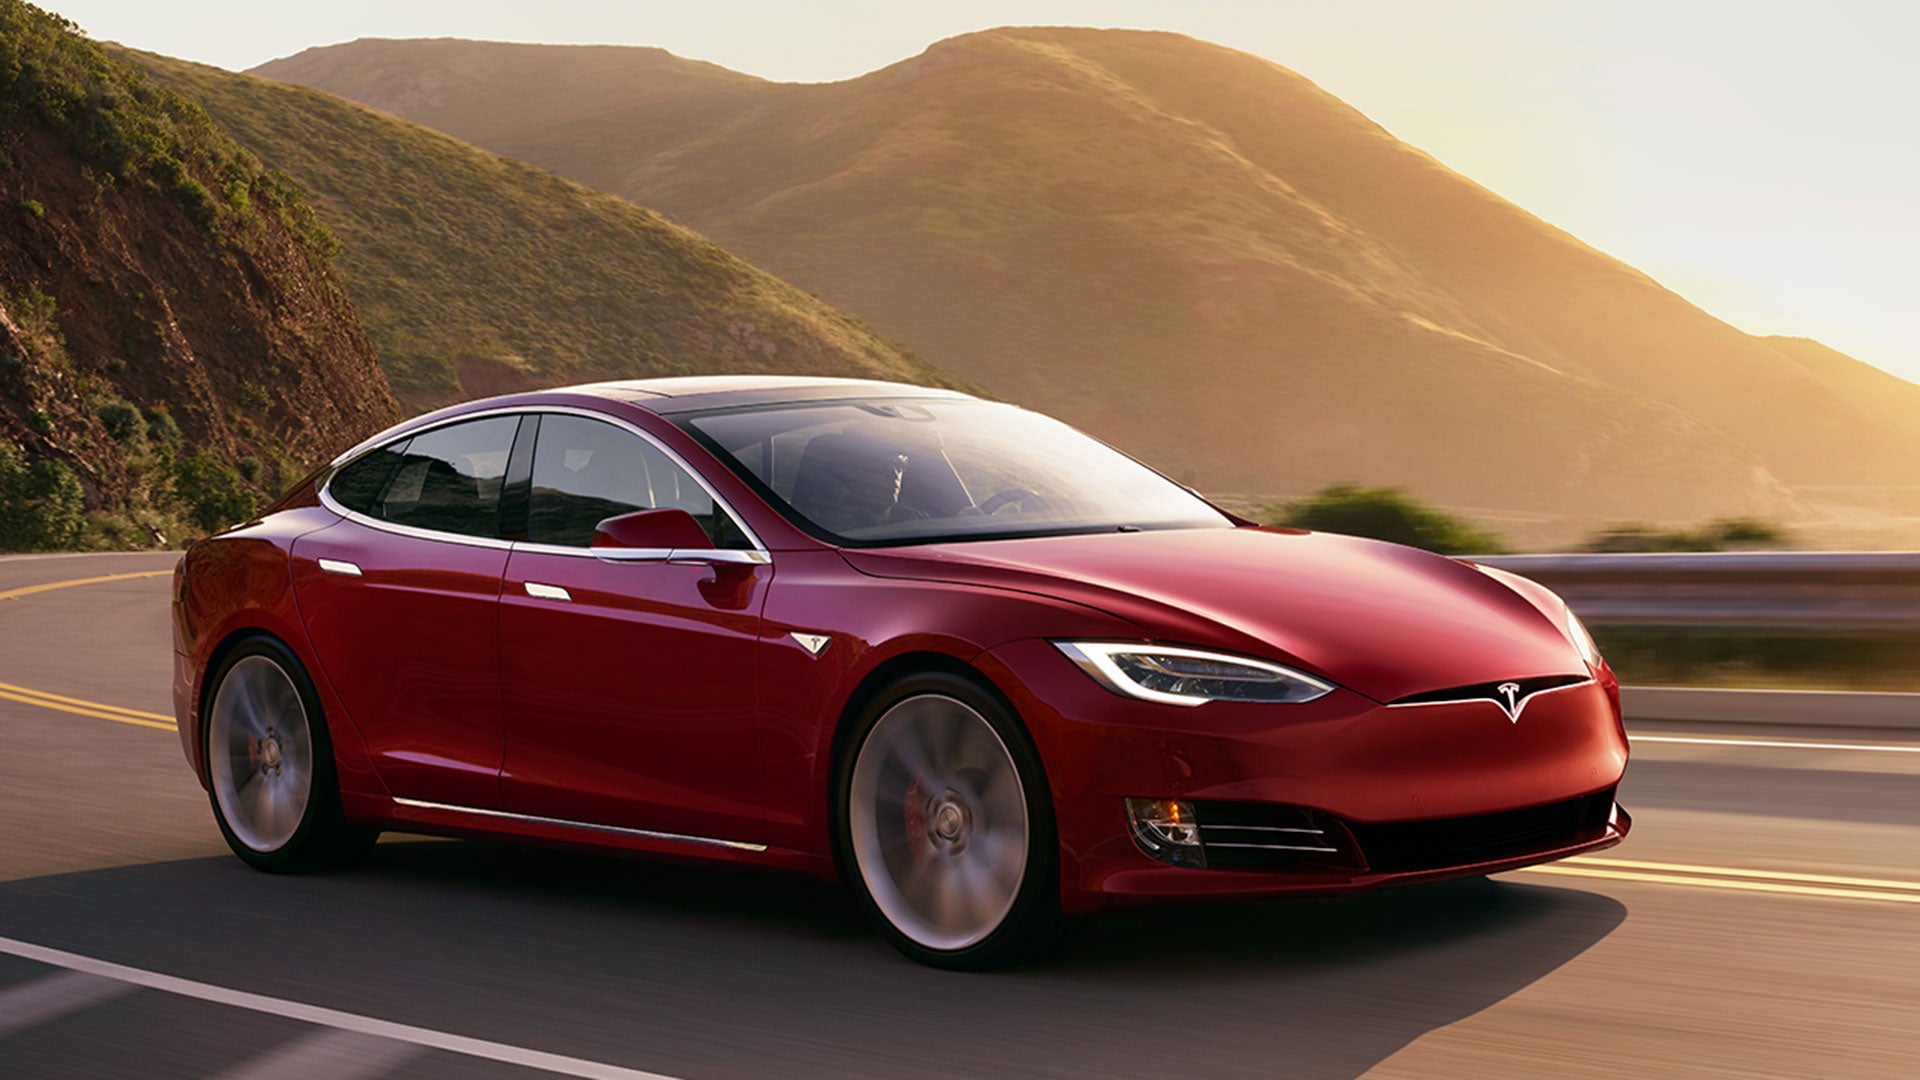 tesla discontinues cheapest model s further widening price gap to model 3 iid=sr link1